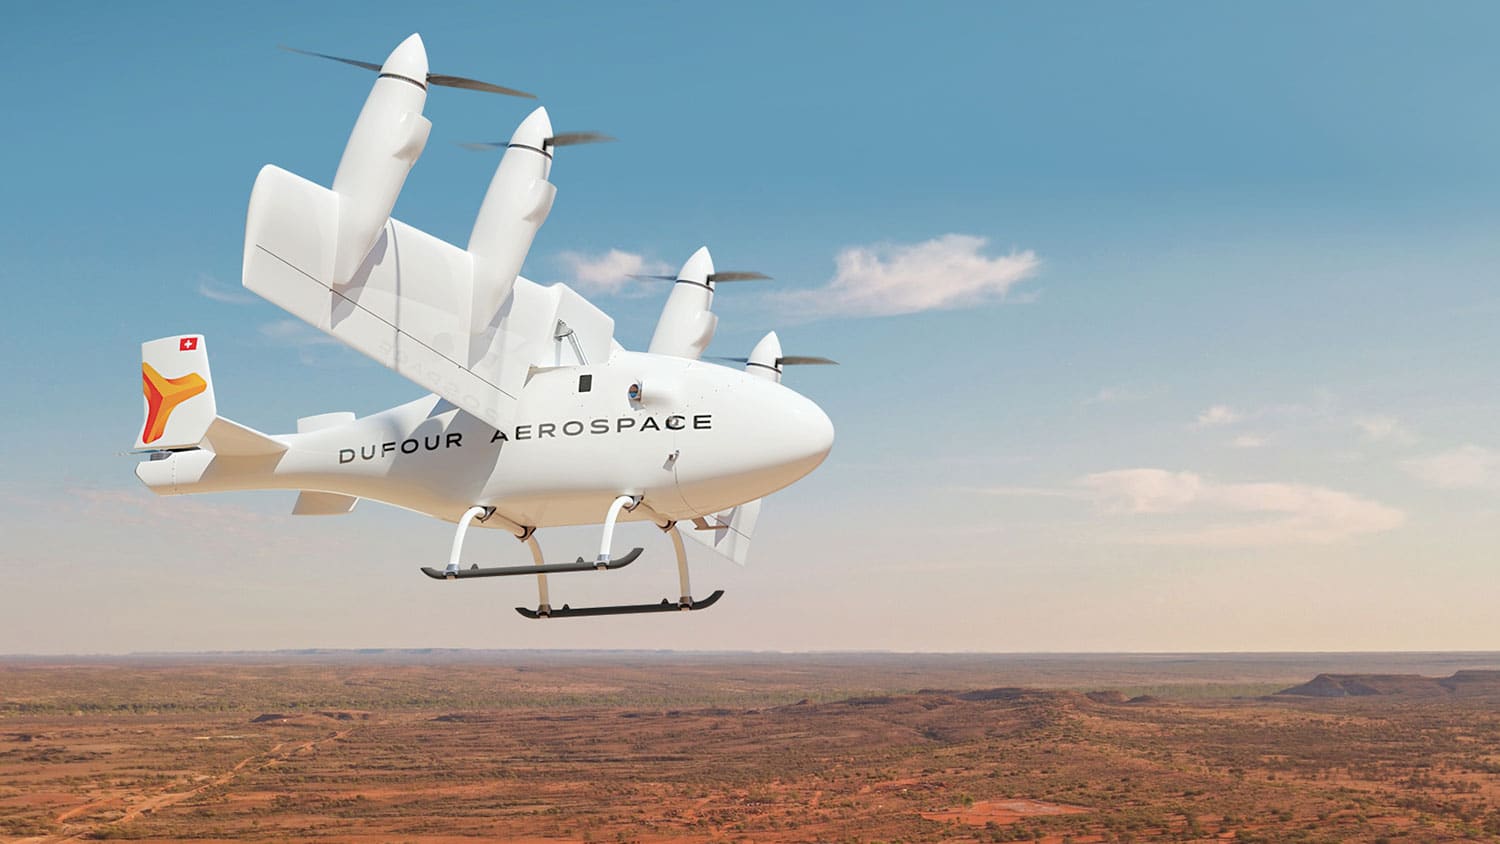 Dufour Aerospace releases final Aero2 design and specifications for innovative tilt-wing drone.